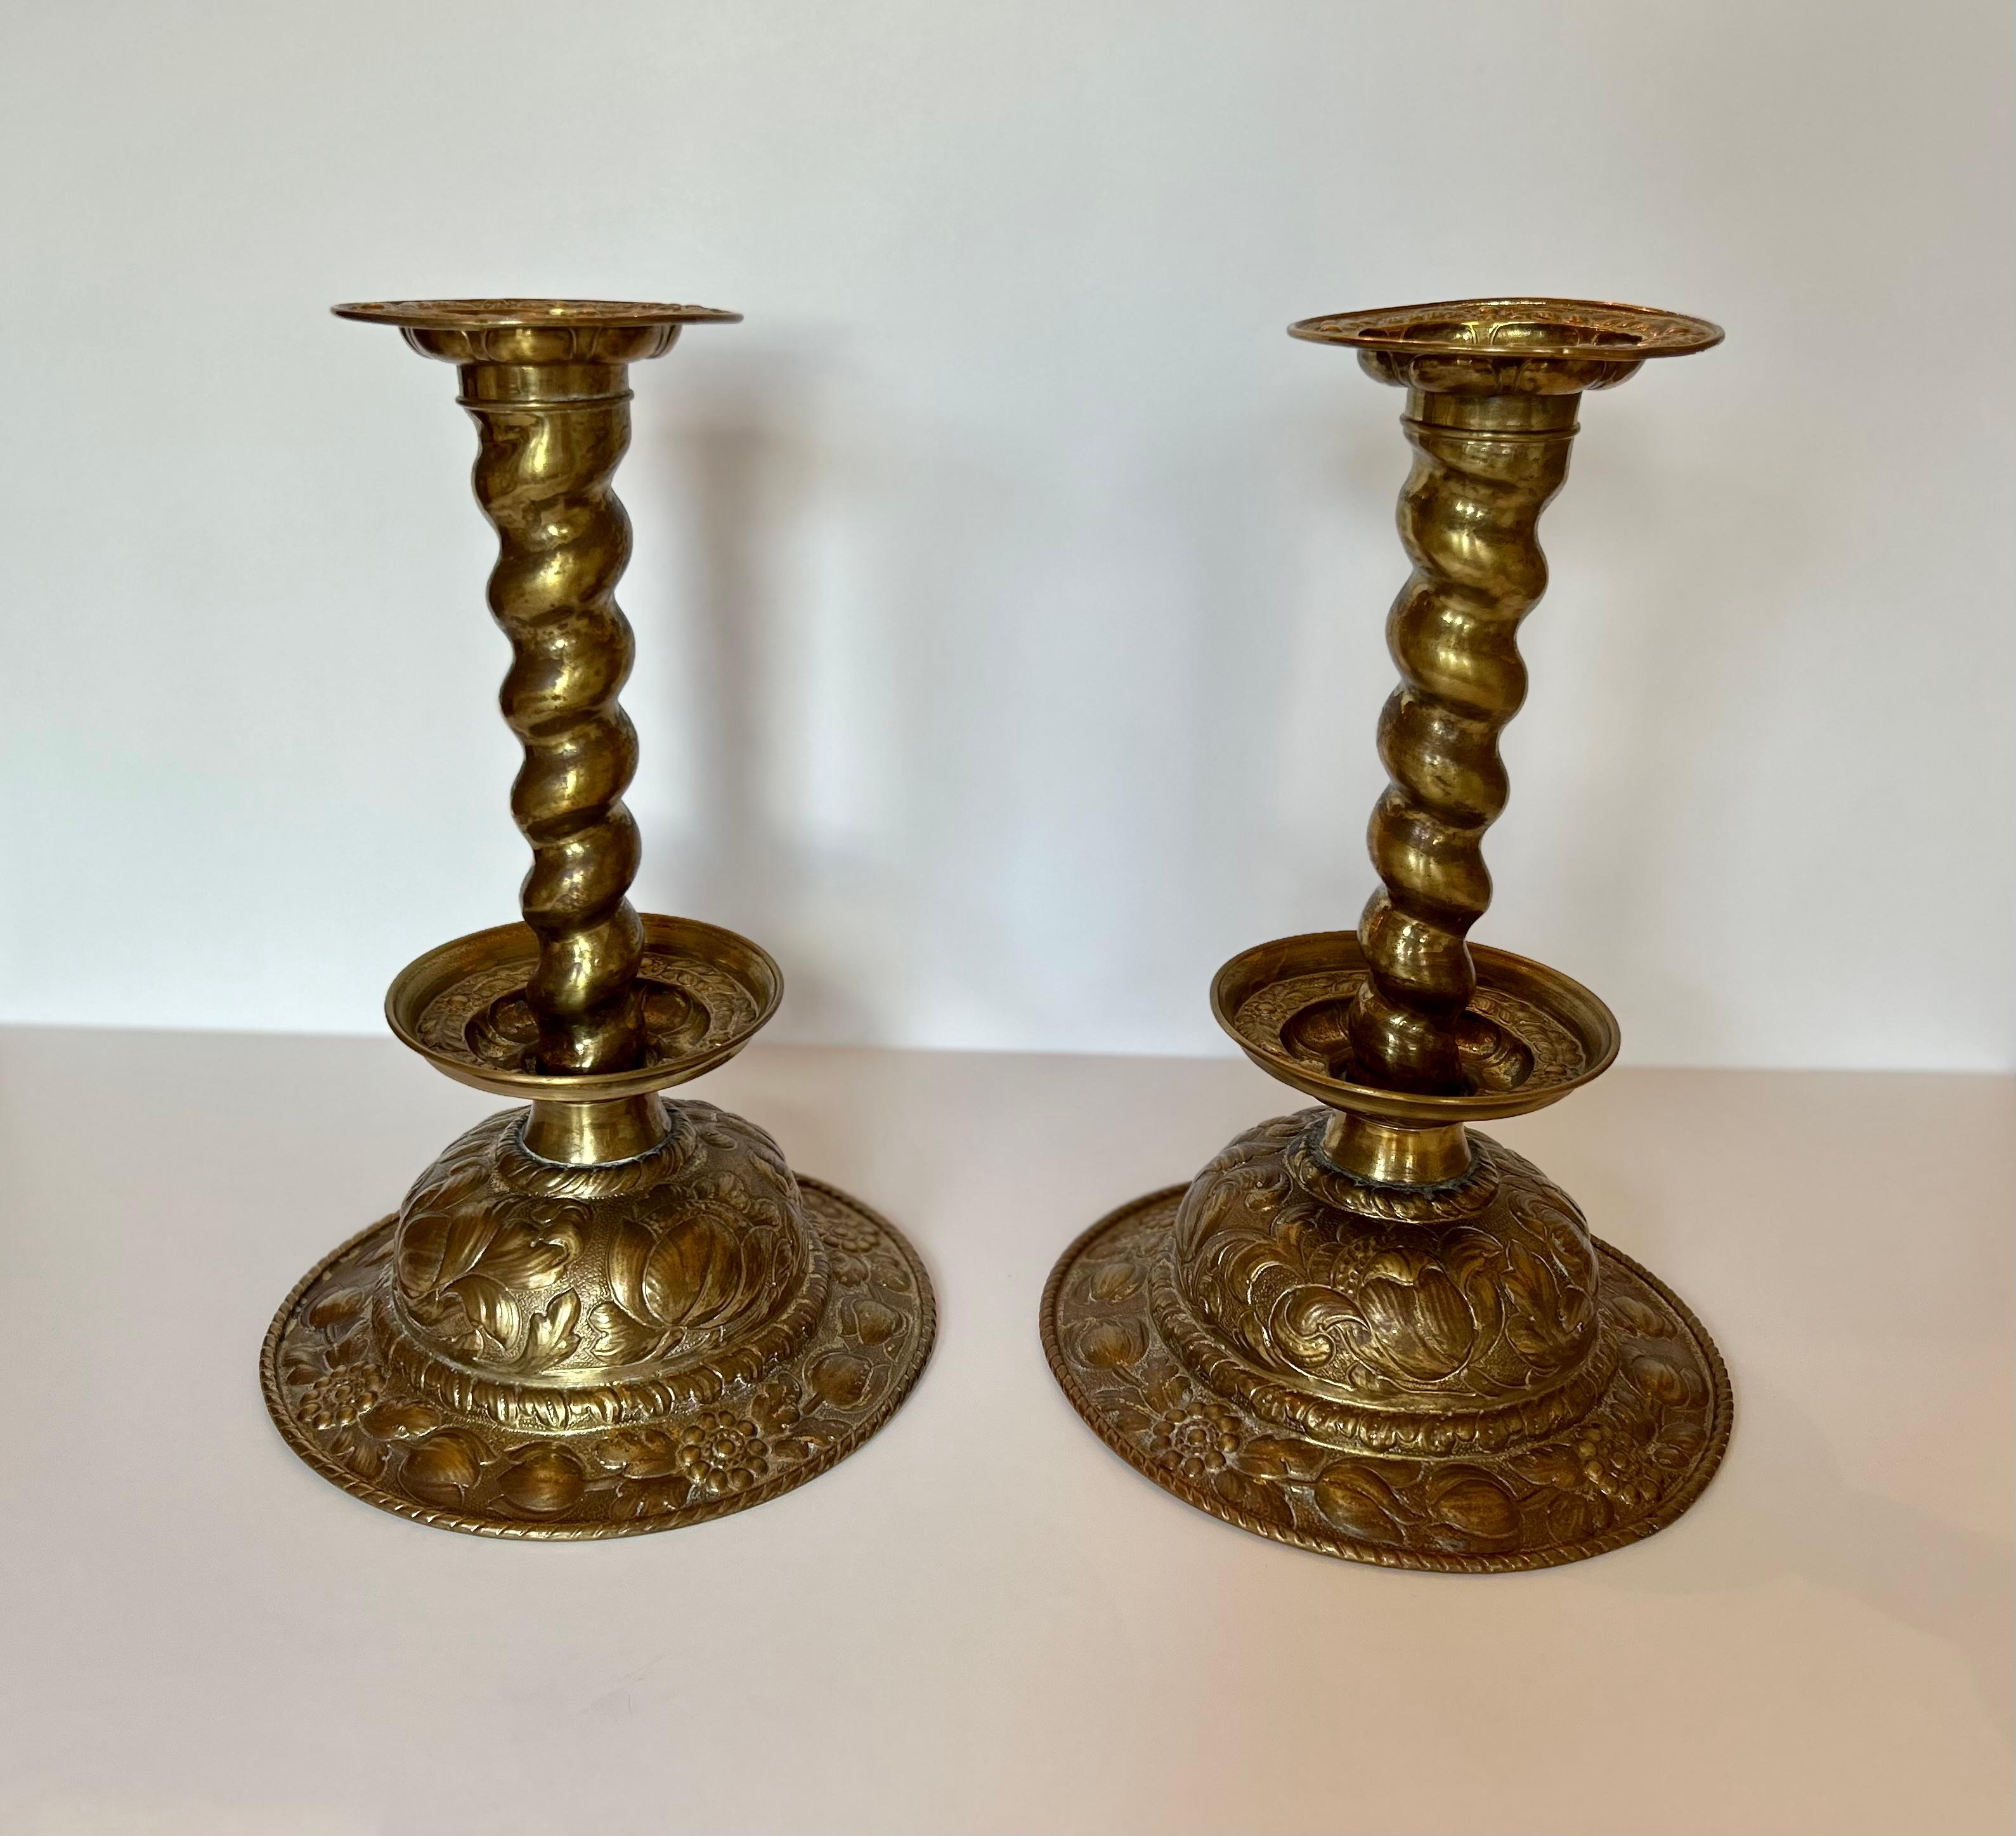 Spectacular pair of large brass candlesticks in the Dutch manner, nineteenth century or earlier. Either Dutch or Swedish. 1500These candlesticks feature beautifully embossed flowers throughout with barley twist shafts, removable drip pans and a